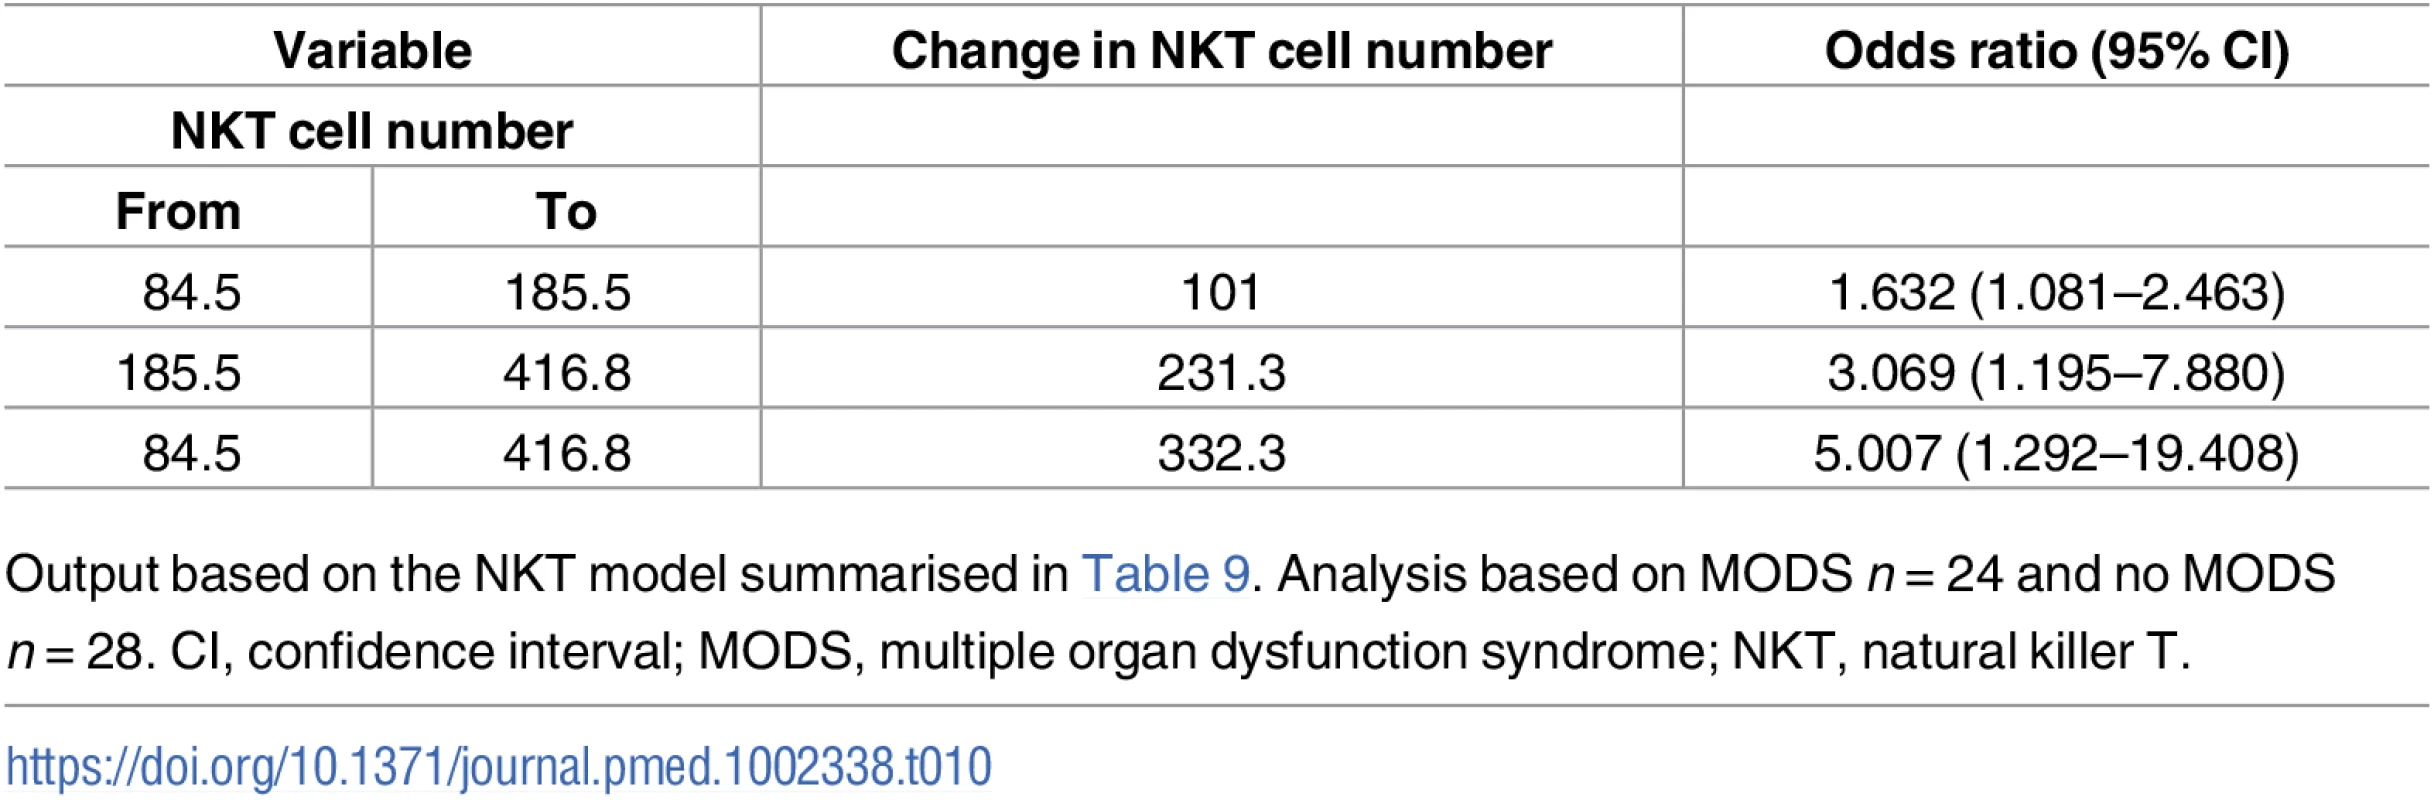 Illustrative odds ratios for development of MODS based on changes in values of NKT number.